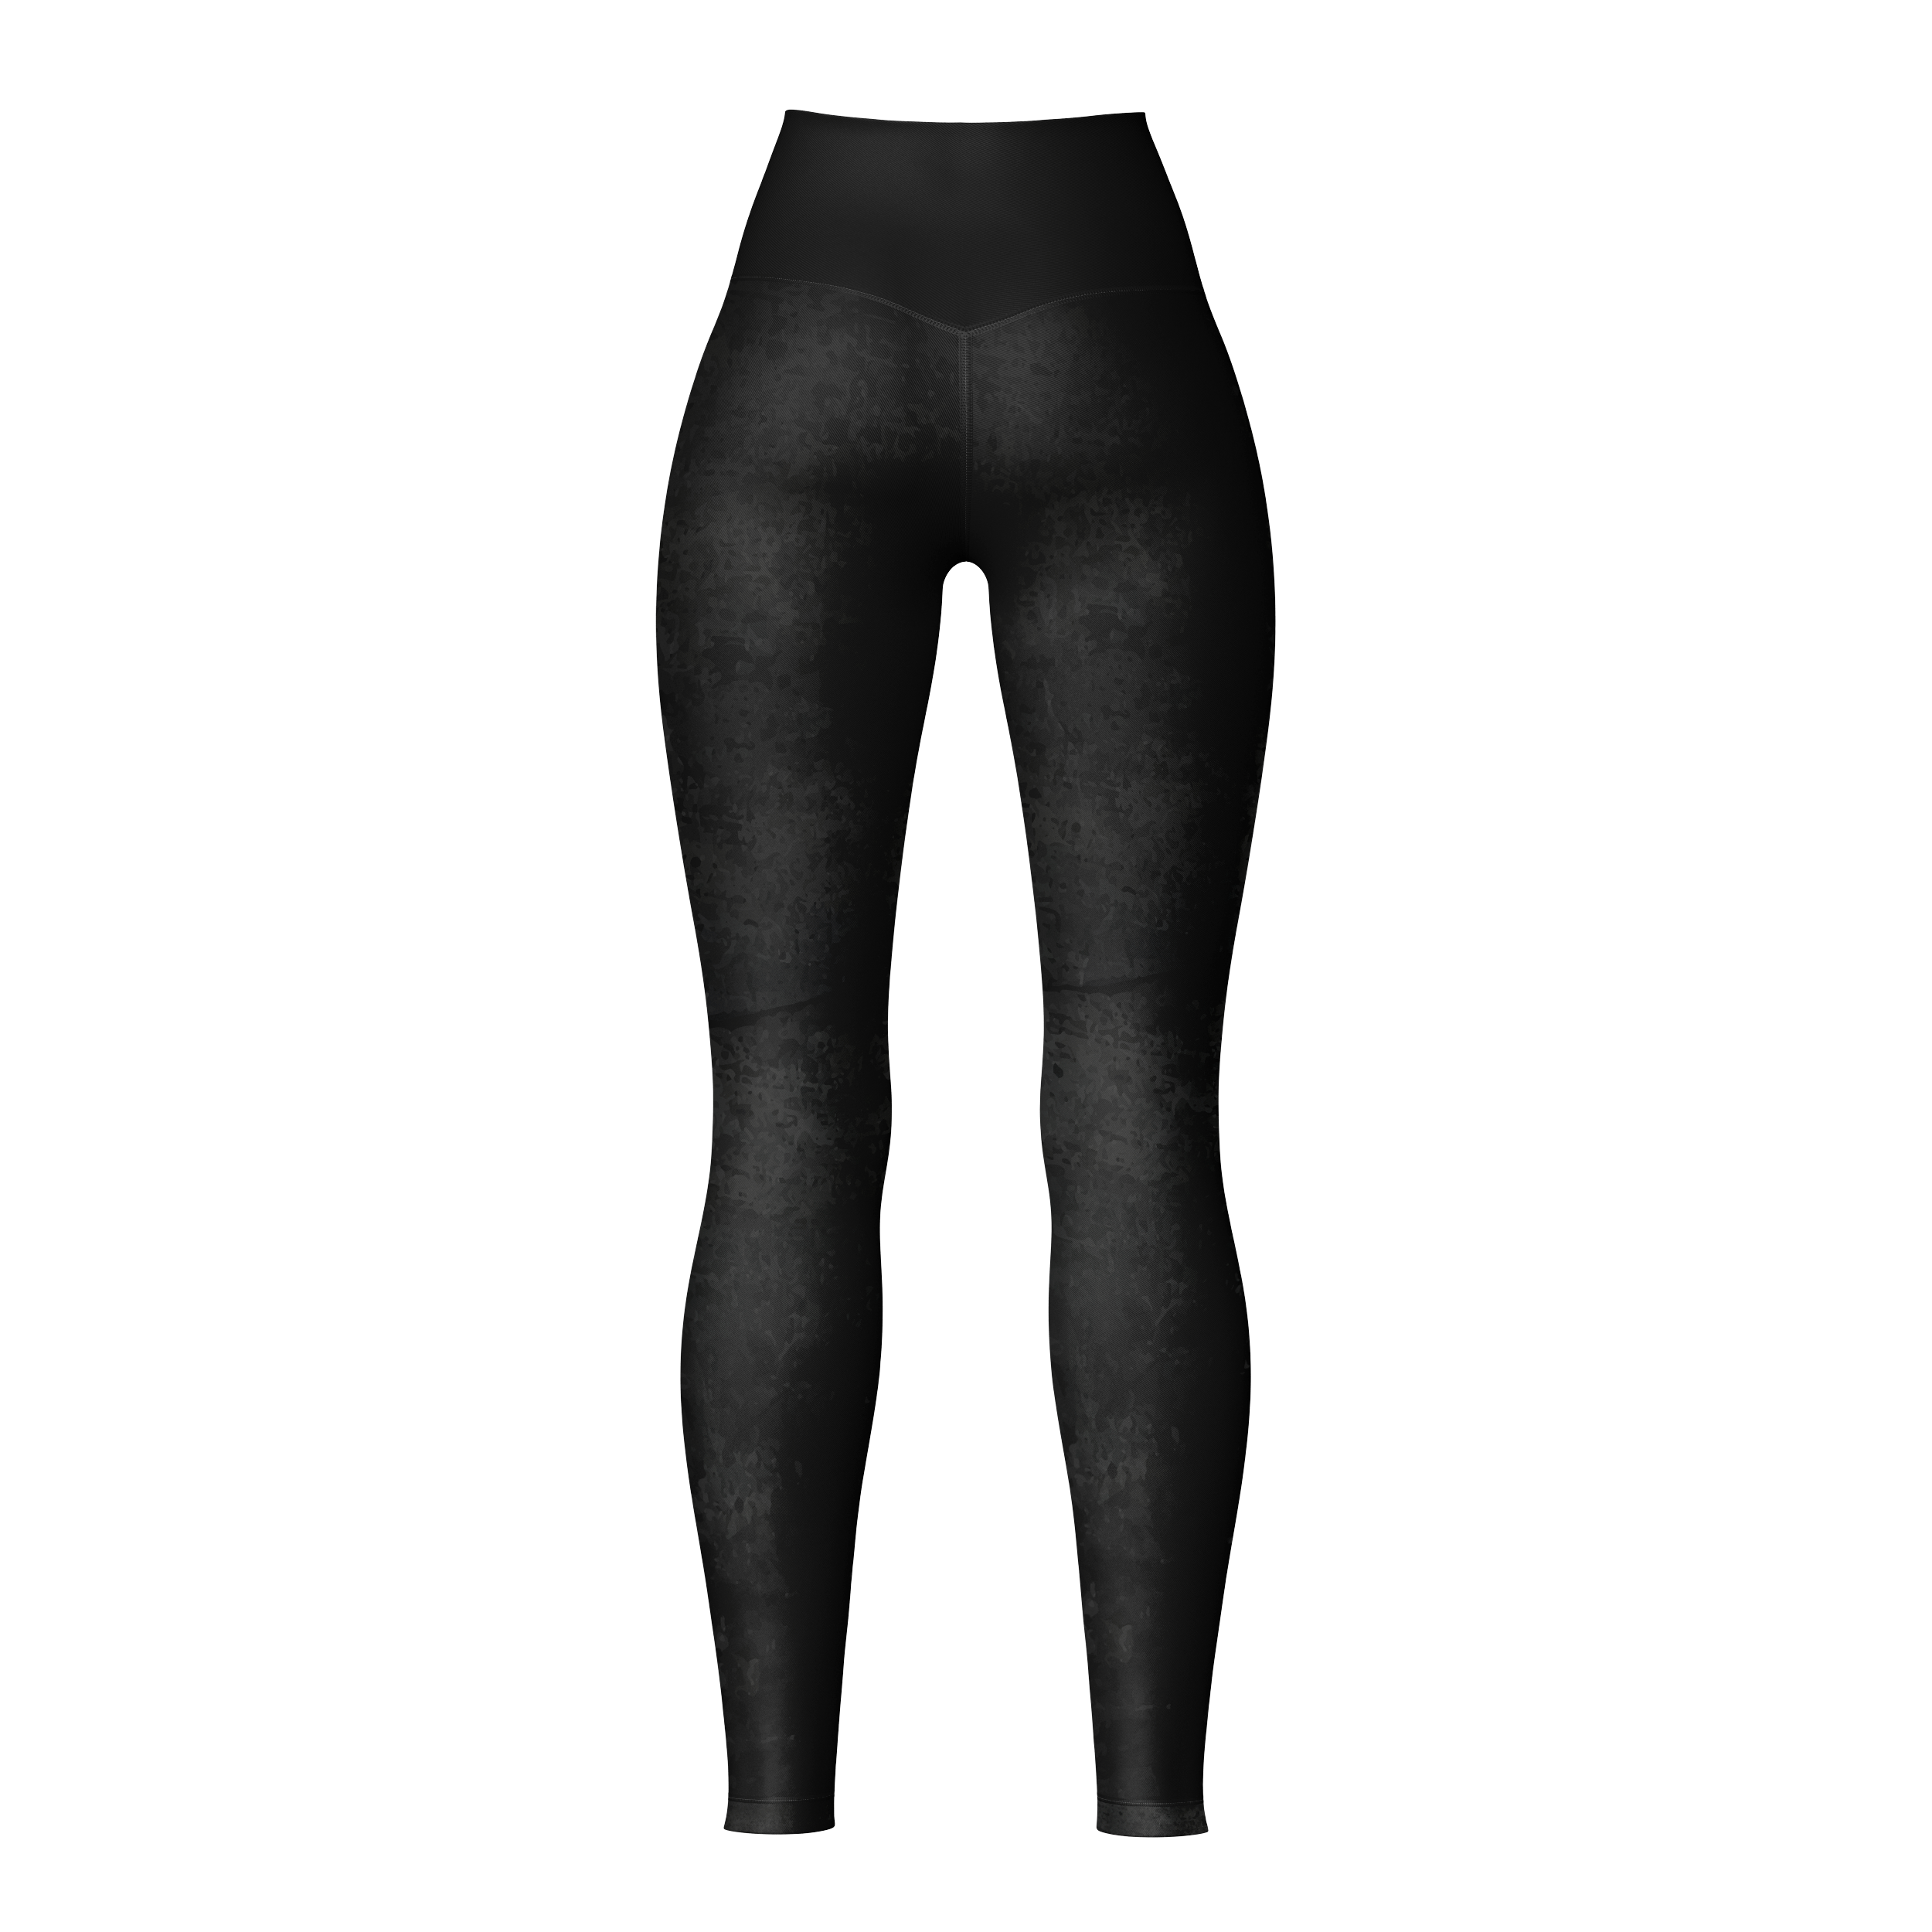 Apocalypse Dark Floral Spats for Women - Fight Kit